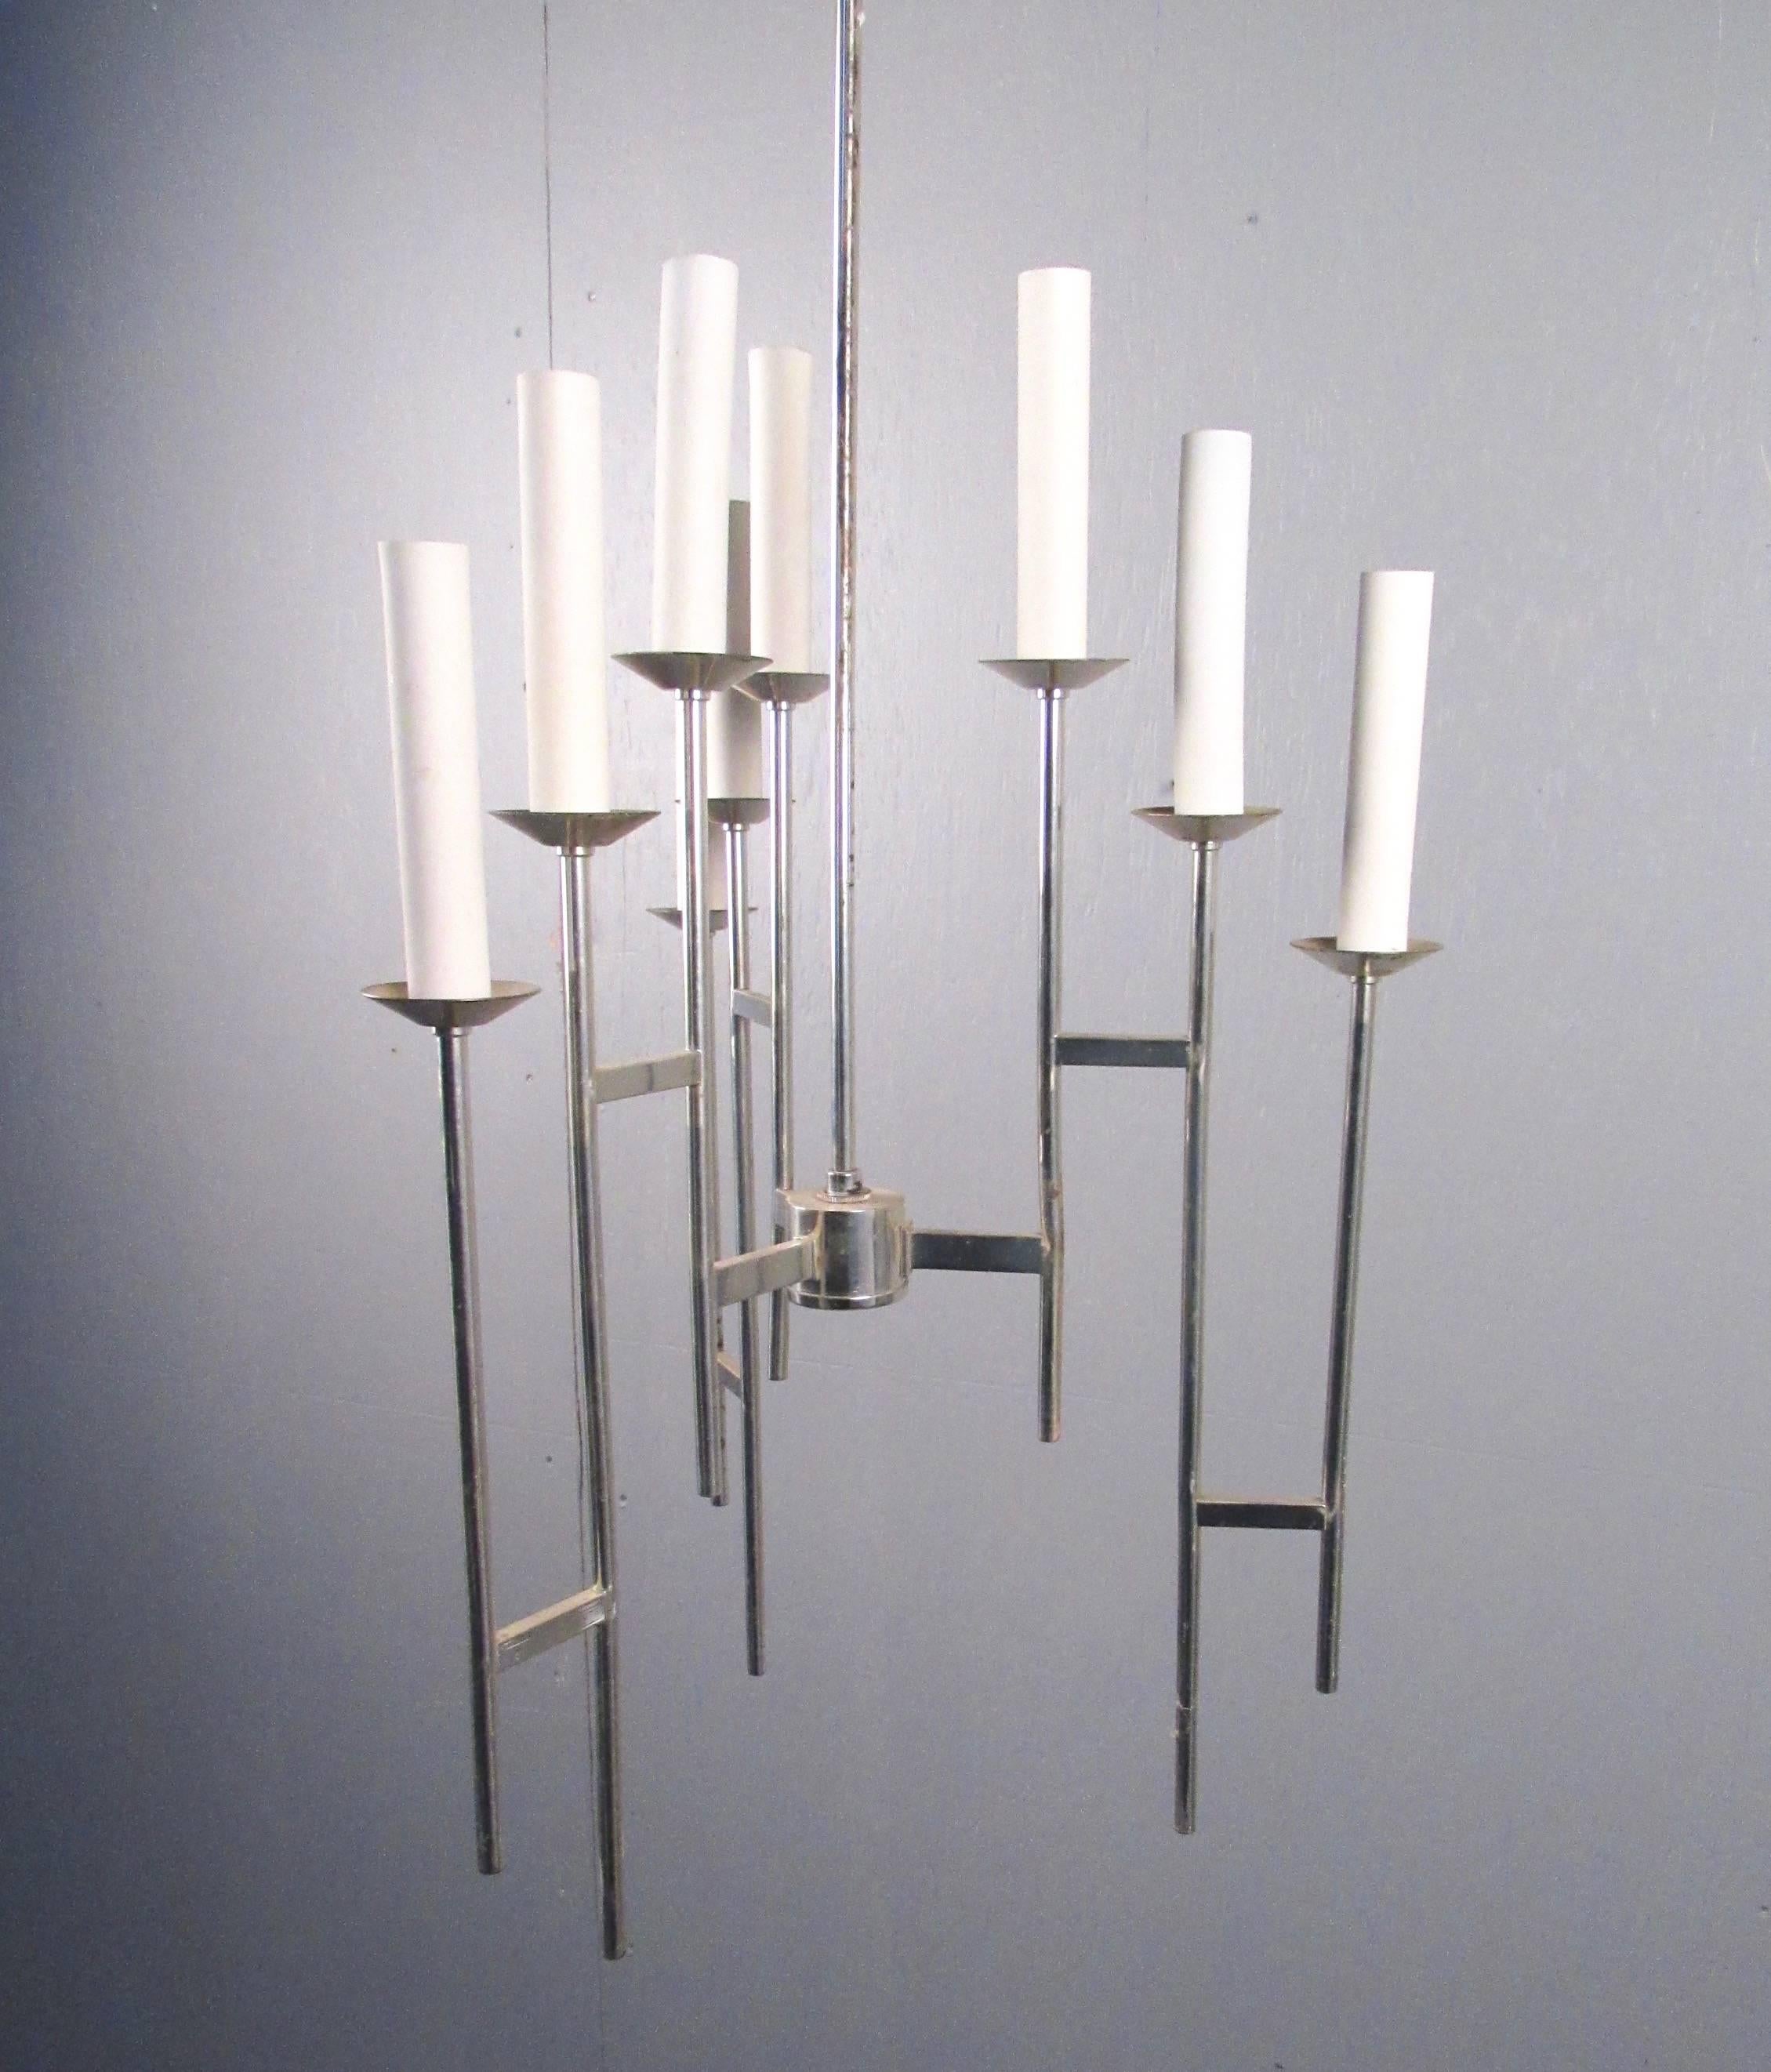 This vintage modern hanging light fixture features nine candlestick style light fixtures in a modernistic chrome finish chandelier. Slender and stylish, this vintage lighting is ready for some gentle rehab and a new home. Please confirm item